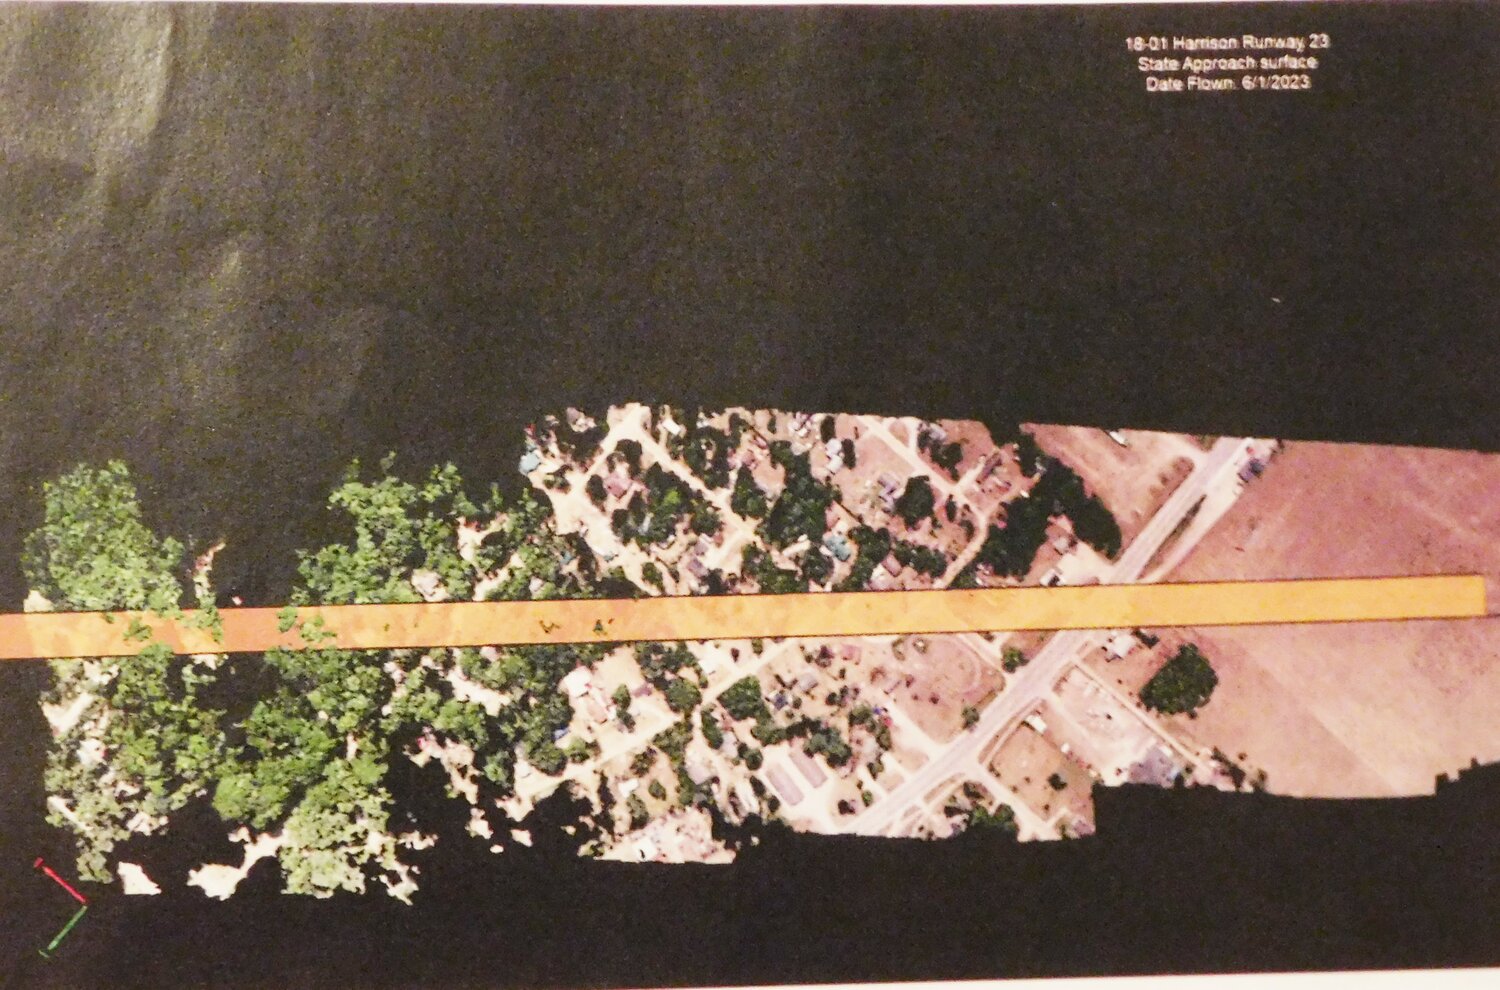 These drone Runway 23 photos with color overlays show the difference between what the state allows for runway approach clearances (gold) and the lower federal height limitations (red). The encroaching trees are vastly different between the two